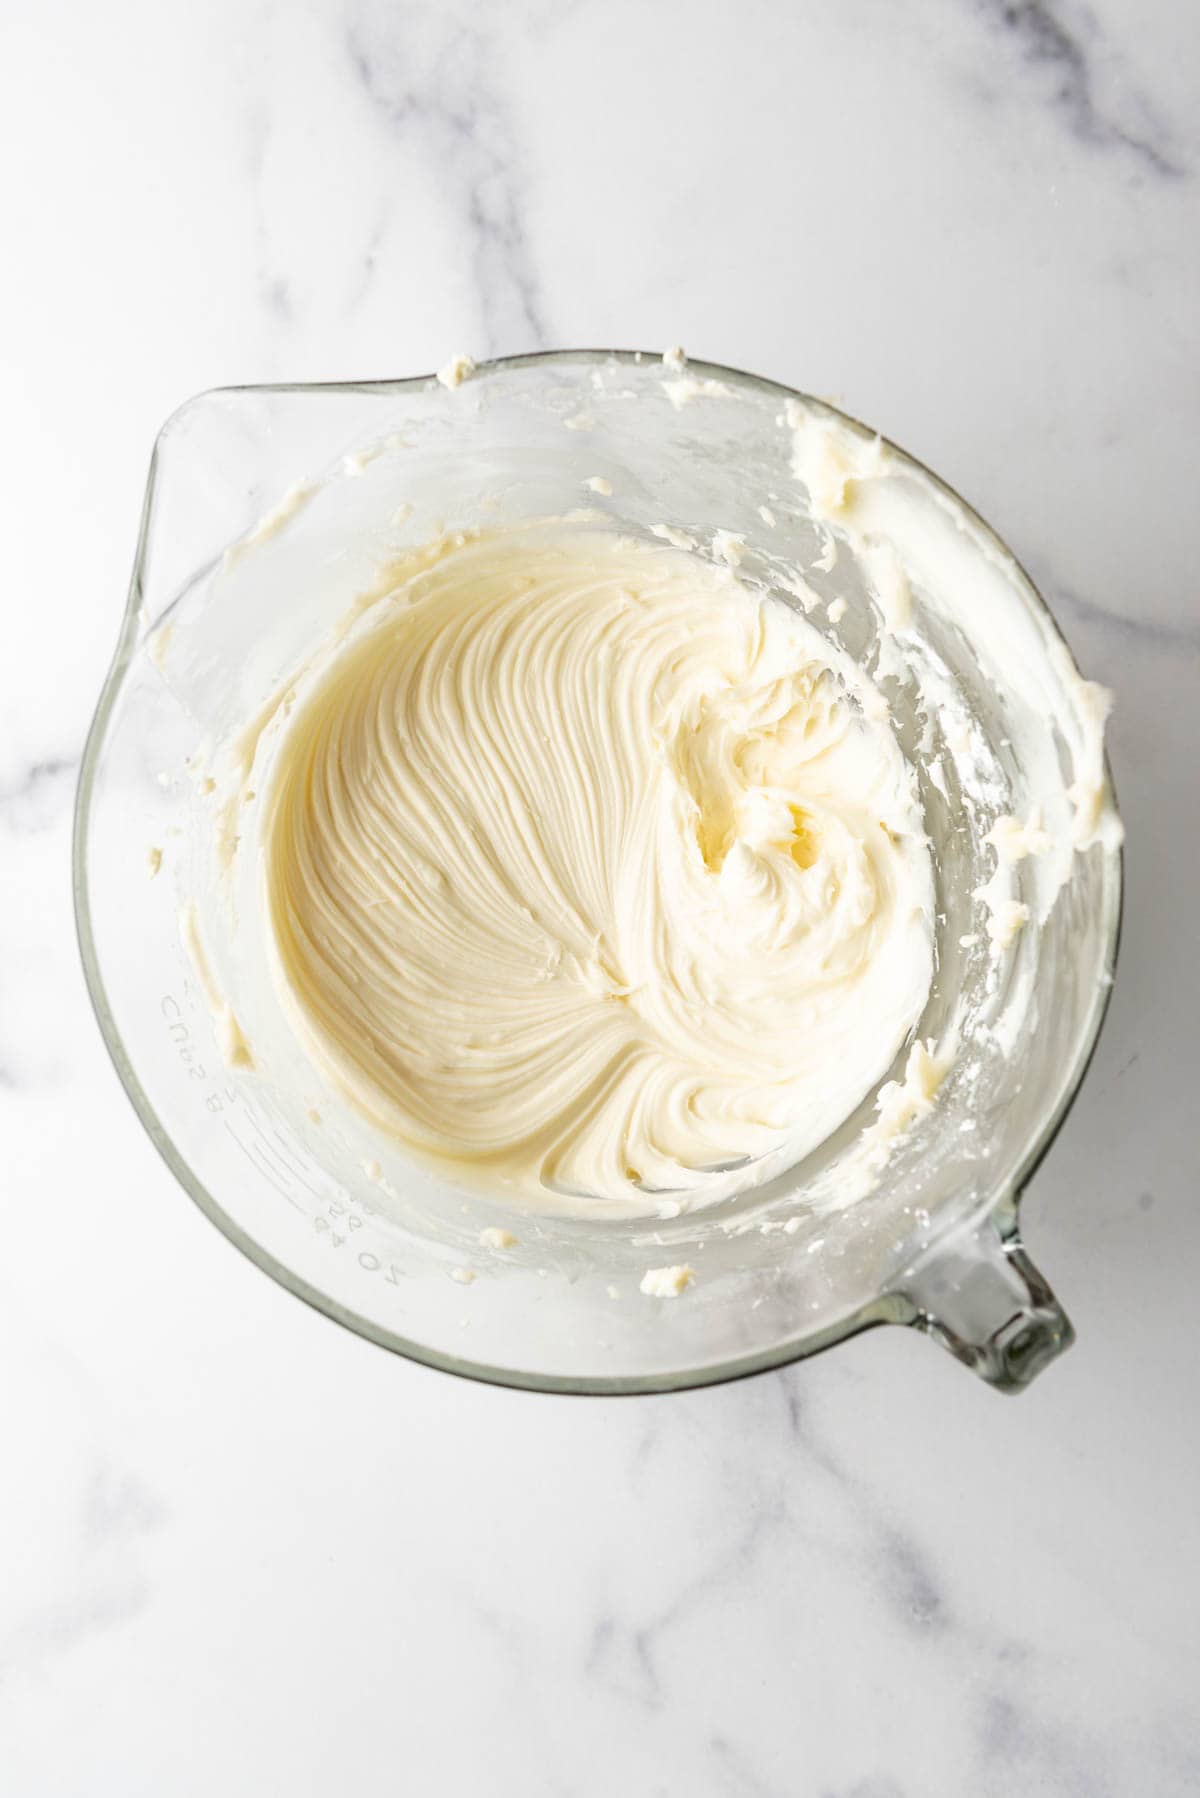 An image of cream cheese frosting freshly mixed in a mixing bowl.